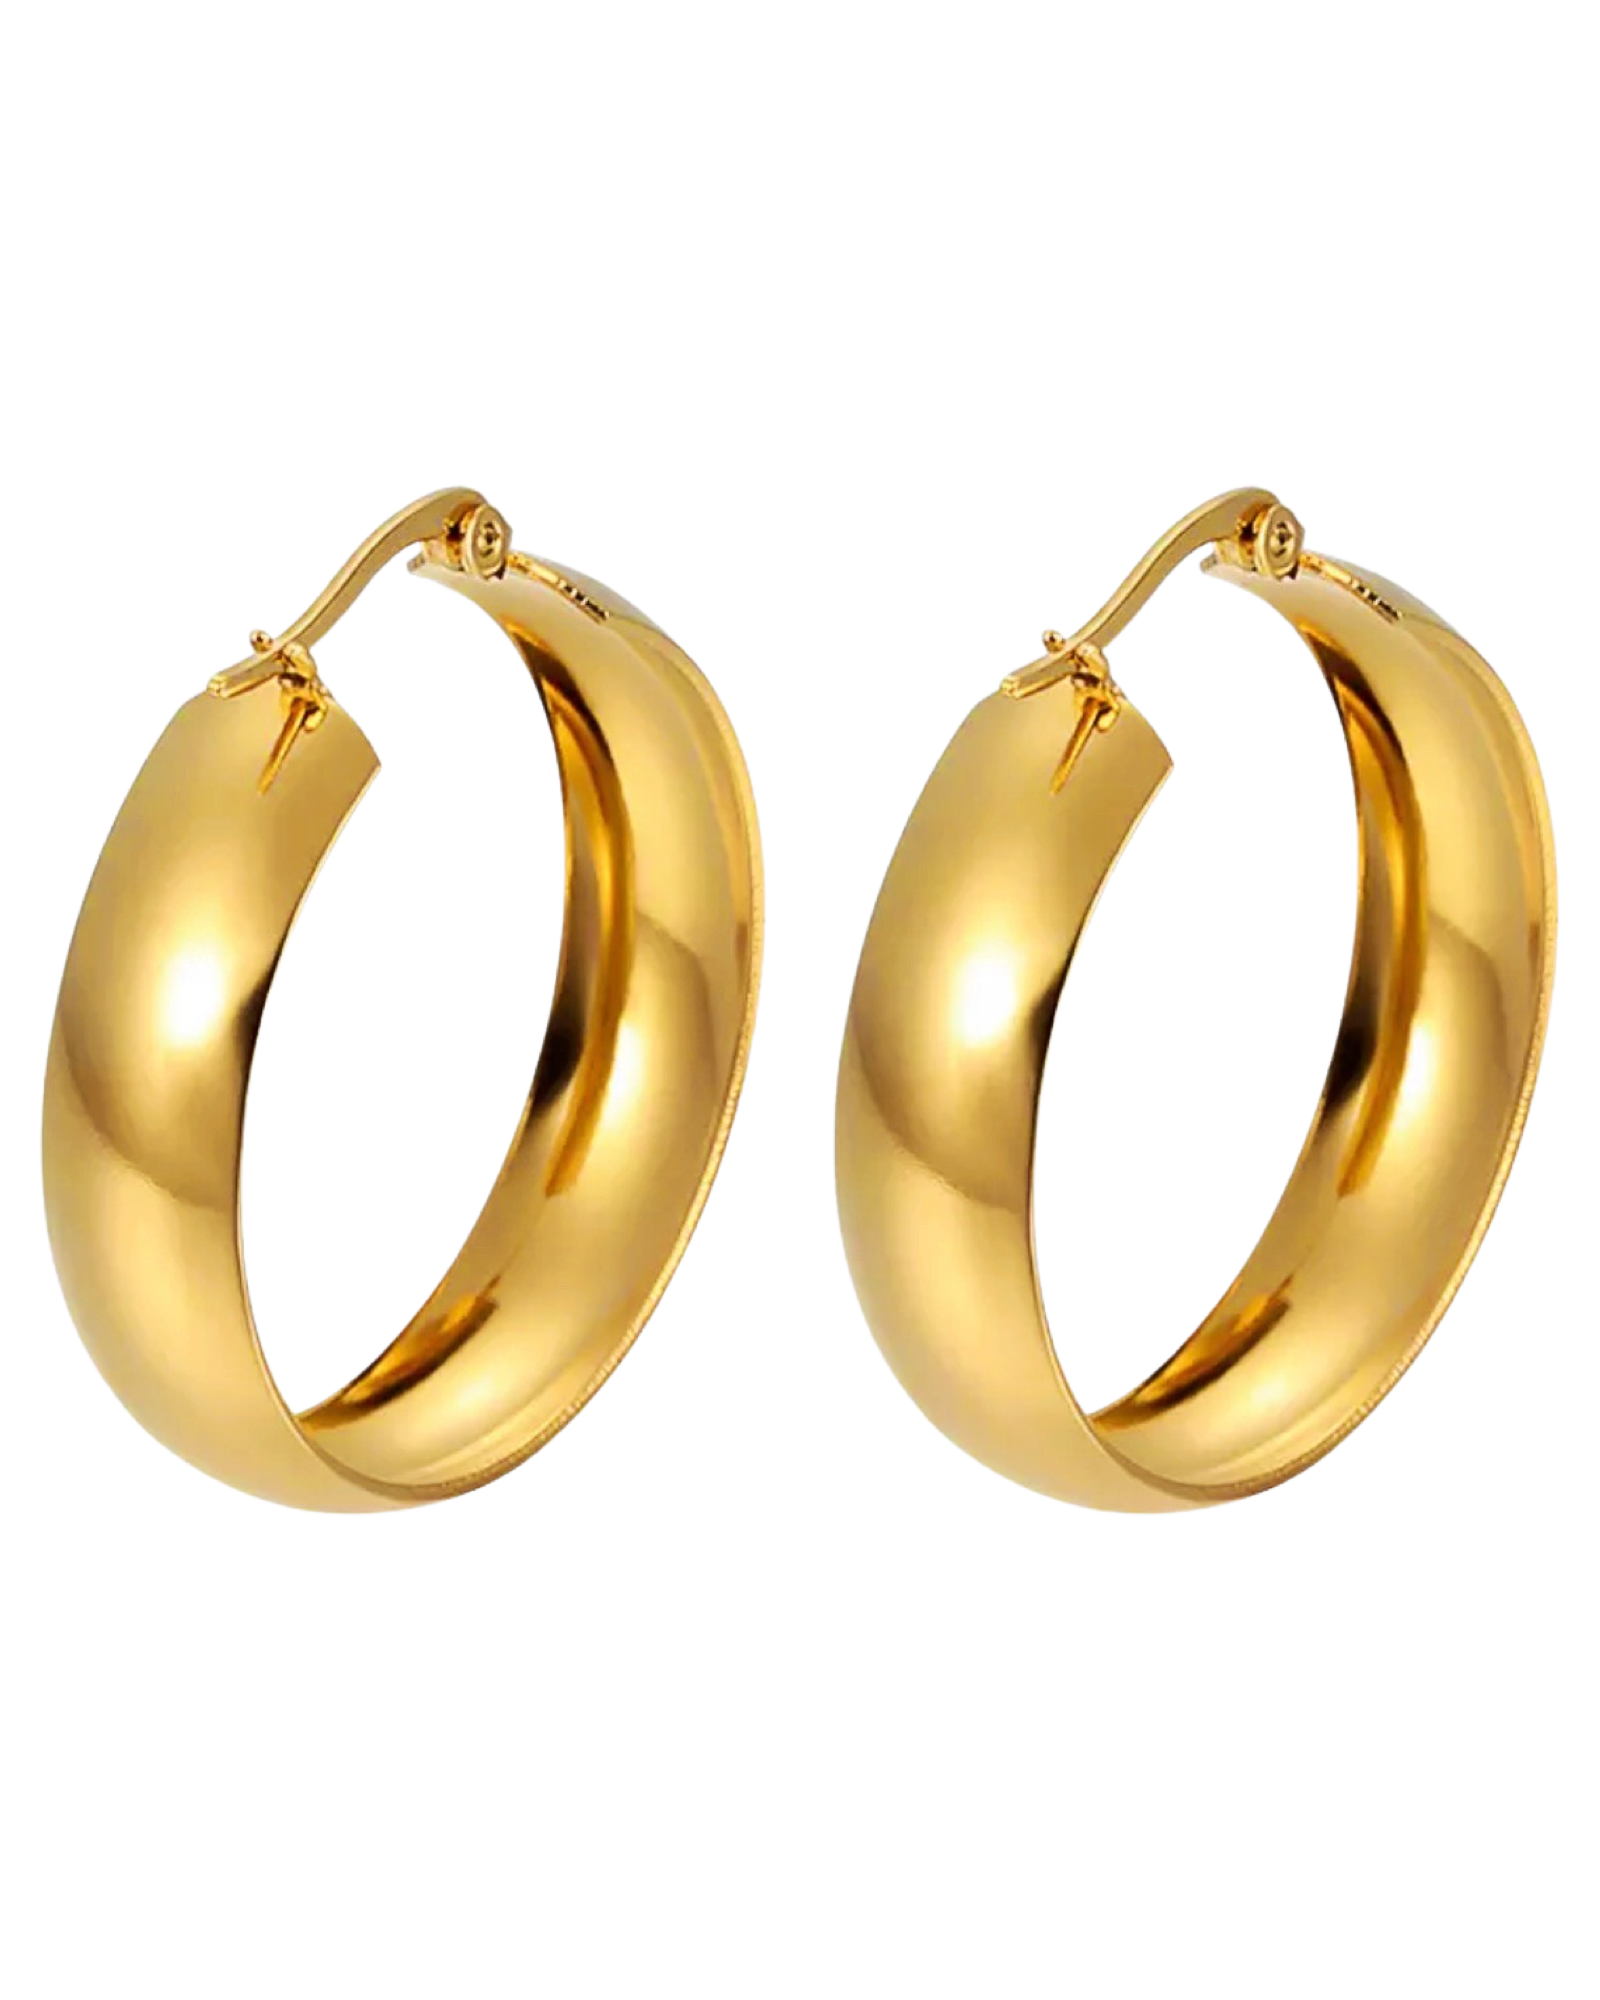 40mm Gorgeous Gorgeous Girls Hoops (18k Gold)